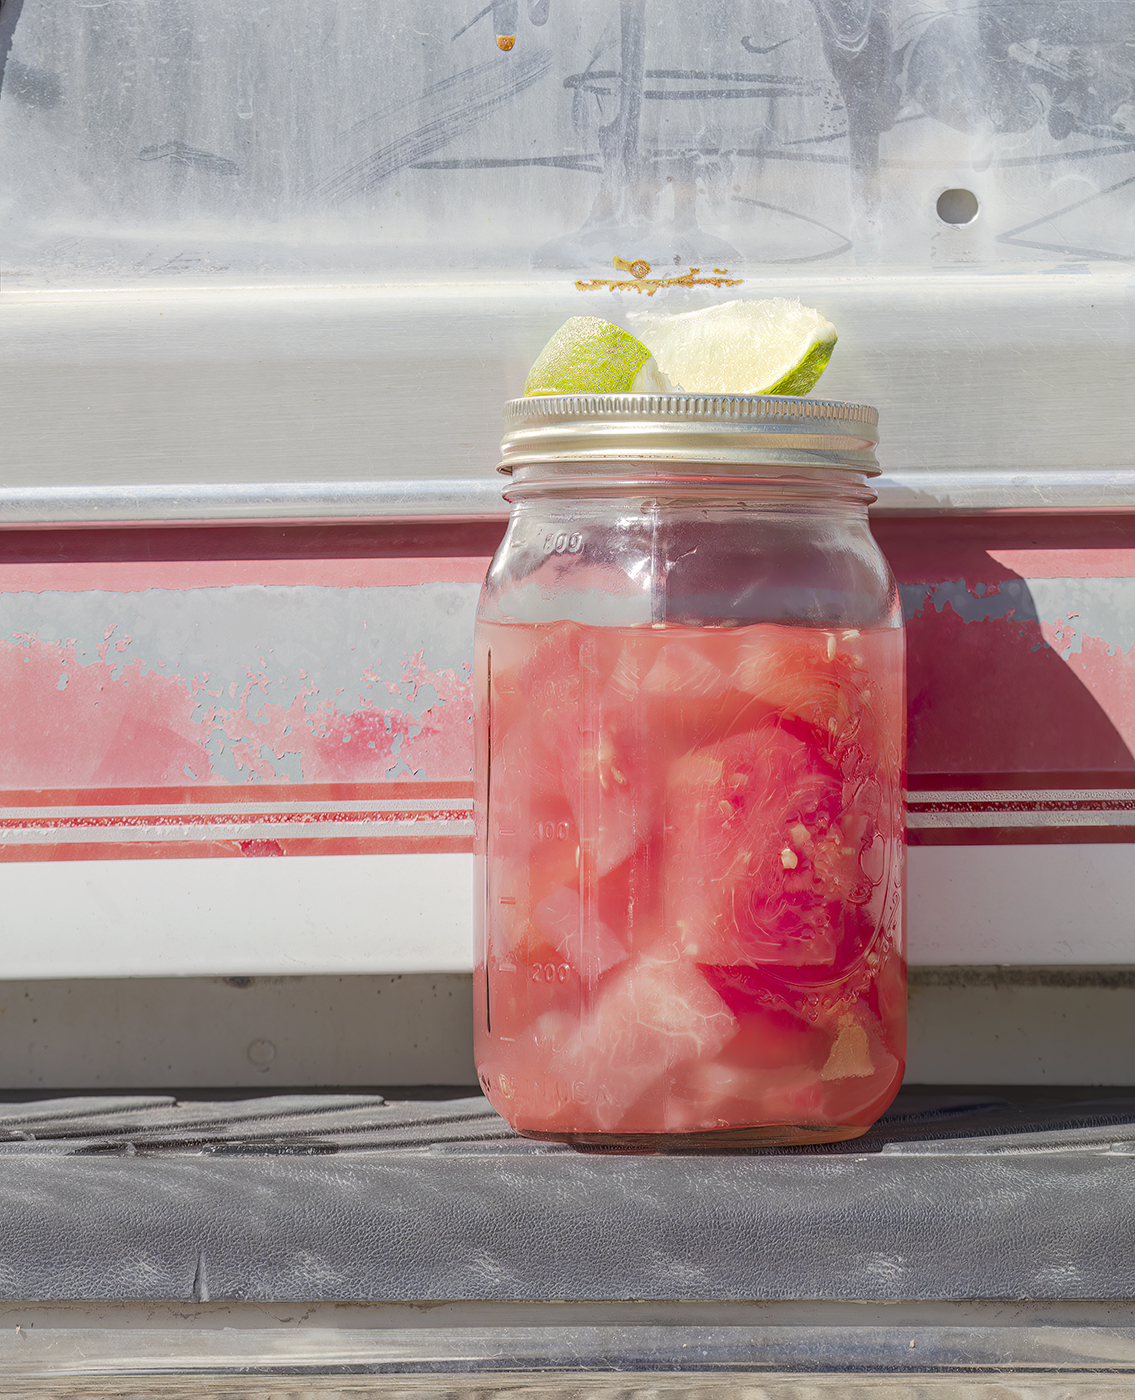 Watermelon moonshine in a bell jar on the back of a pickup truck. Served with lime to cut the burn.